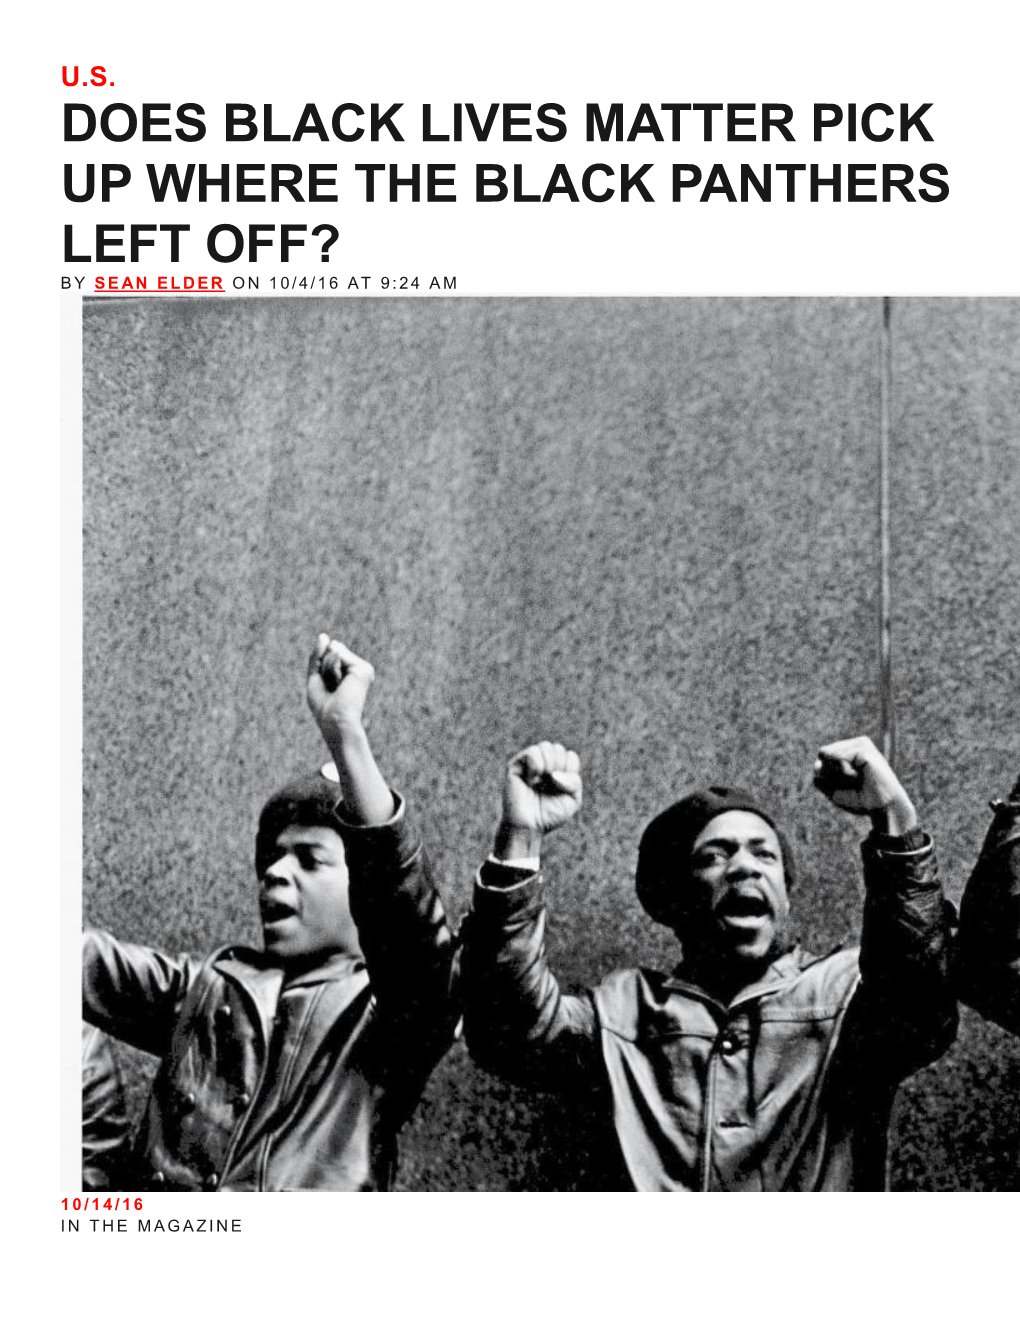 Does Black Lives Matter Pick up Where the Black Panthers Left Off? by Sean Elder on 10/4/16 at 9:24 a M